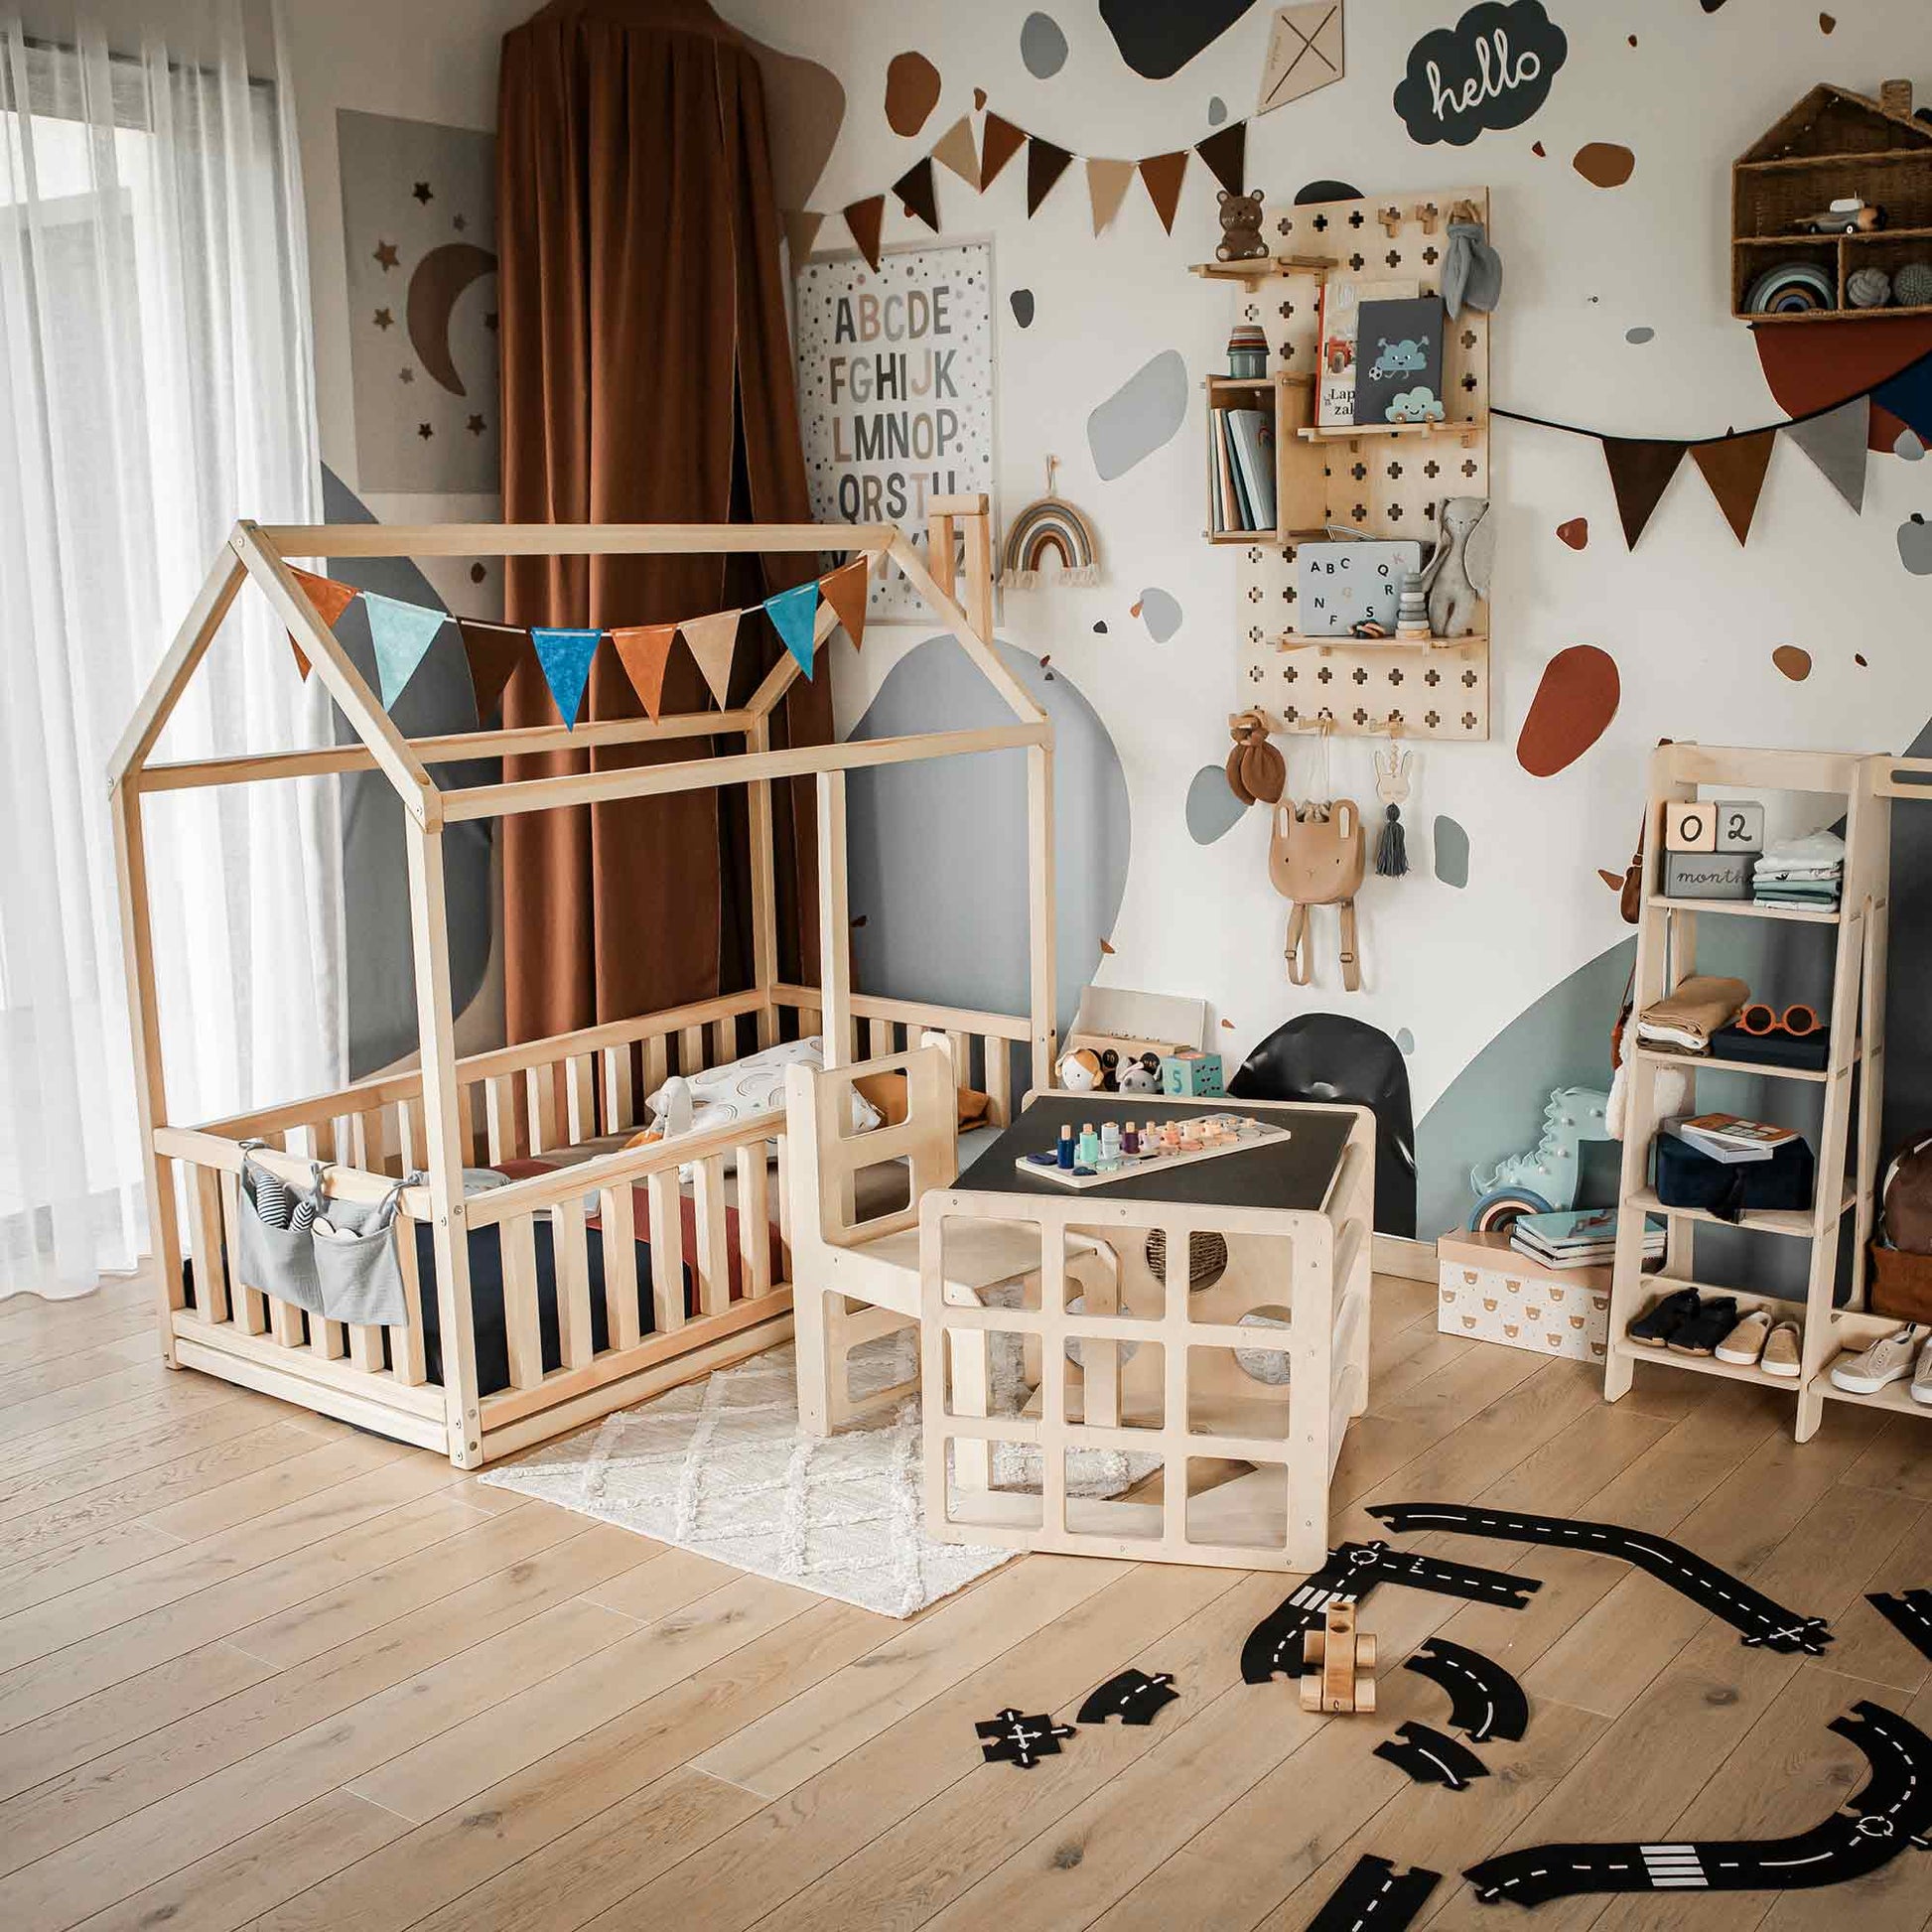 A children's room with a wooden house-shaped bed, a 2-in-1 table and chair set or activity cube in Montessori style, shelves, and colorful decorations. The walls have educational posters and the floor features toys, including a small road mat and a toddler toy for imaginative play.